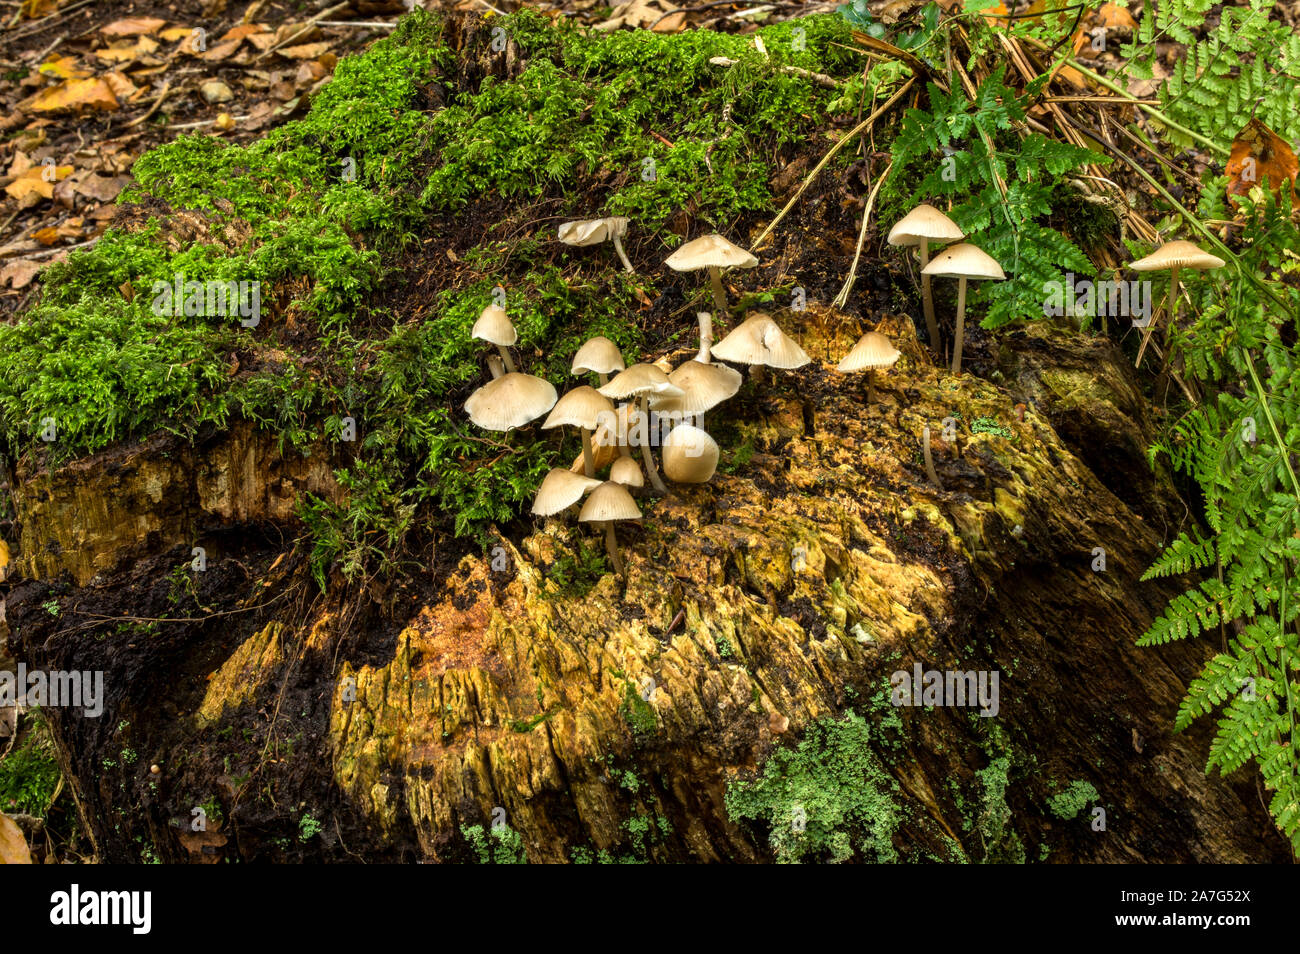 A common mushroom ffound as in this case on hardwood tree stumps Stock Photo